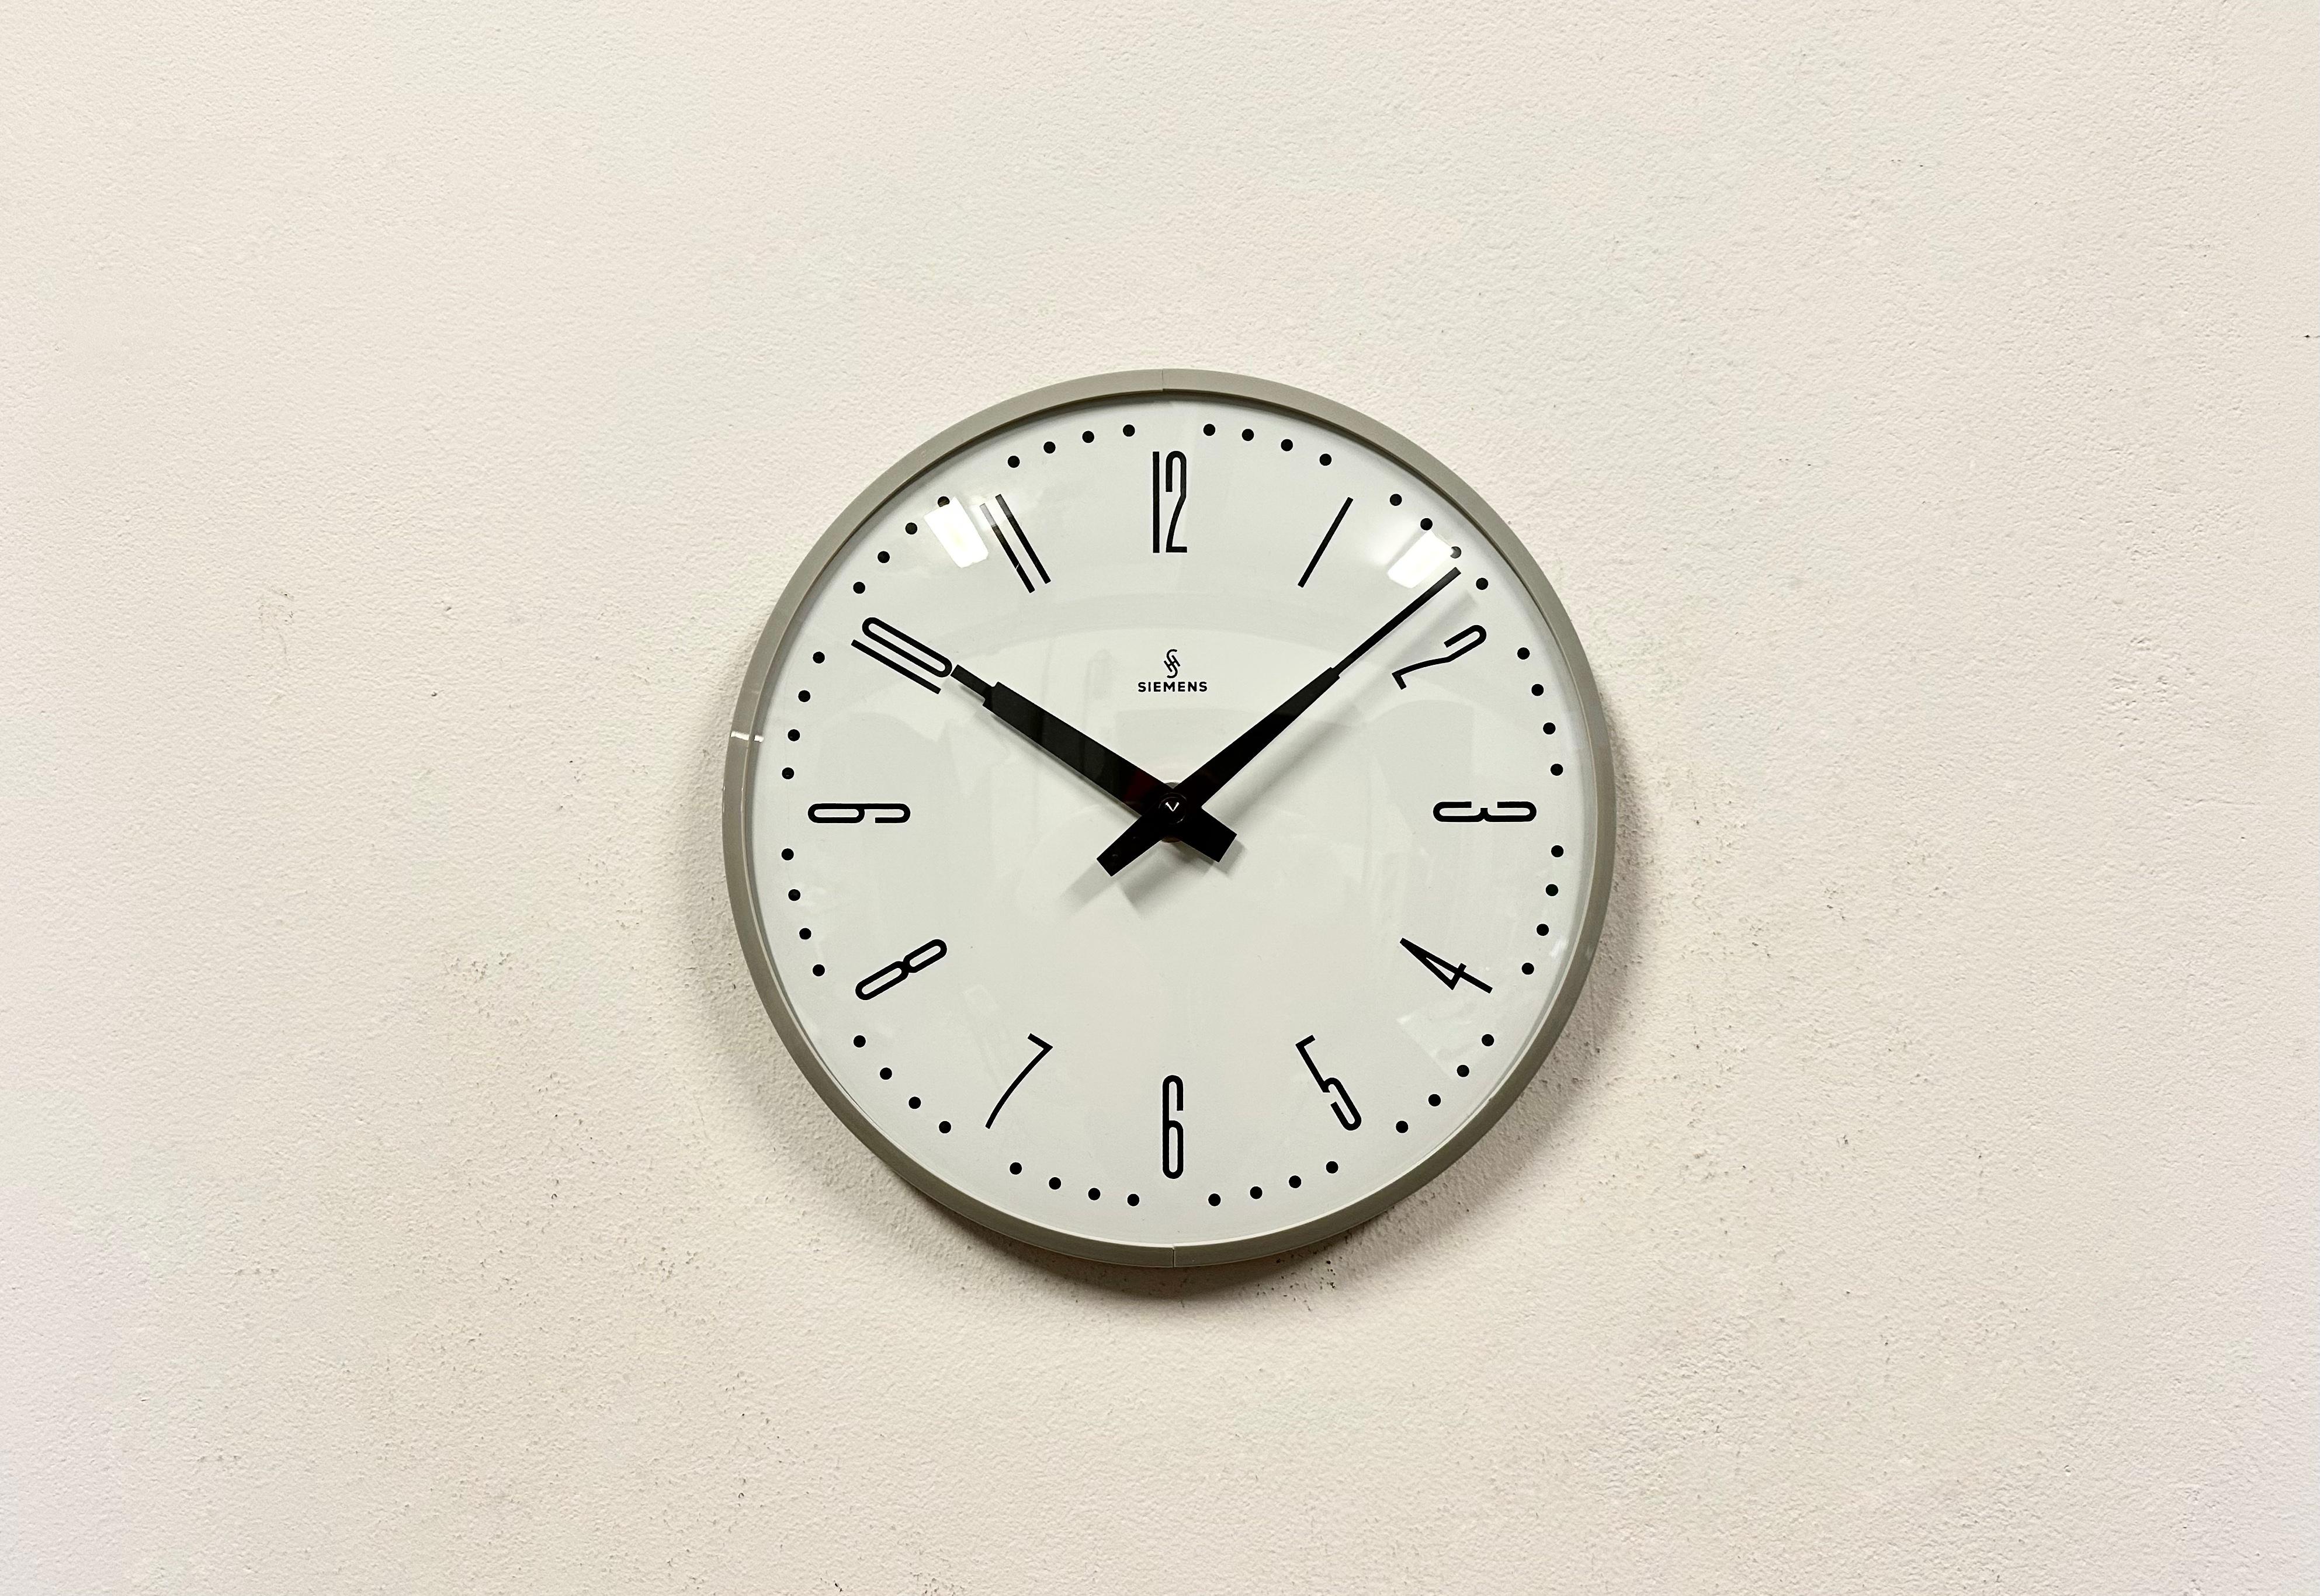 This wall clock was produced by Siemens in Germany during the 1970s. It features a grey bakelite frame, a metal dial and a convex clear glass cover. The piece has been converted into a battery-powered clockwork and requires only one AA-battery. The